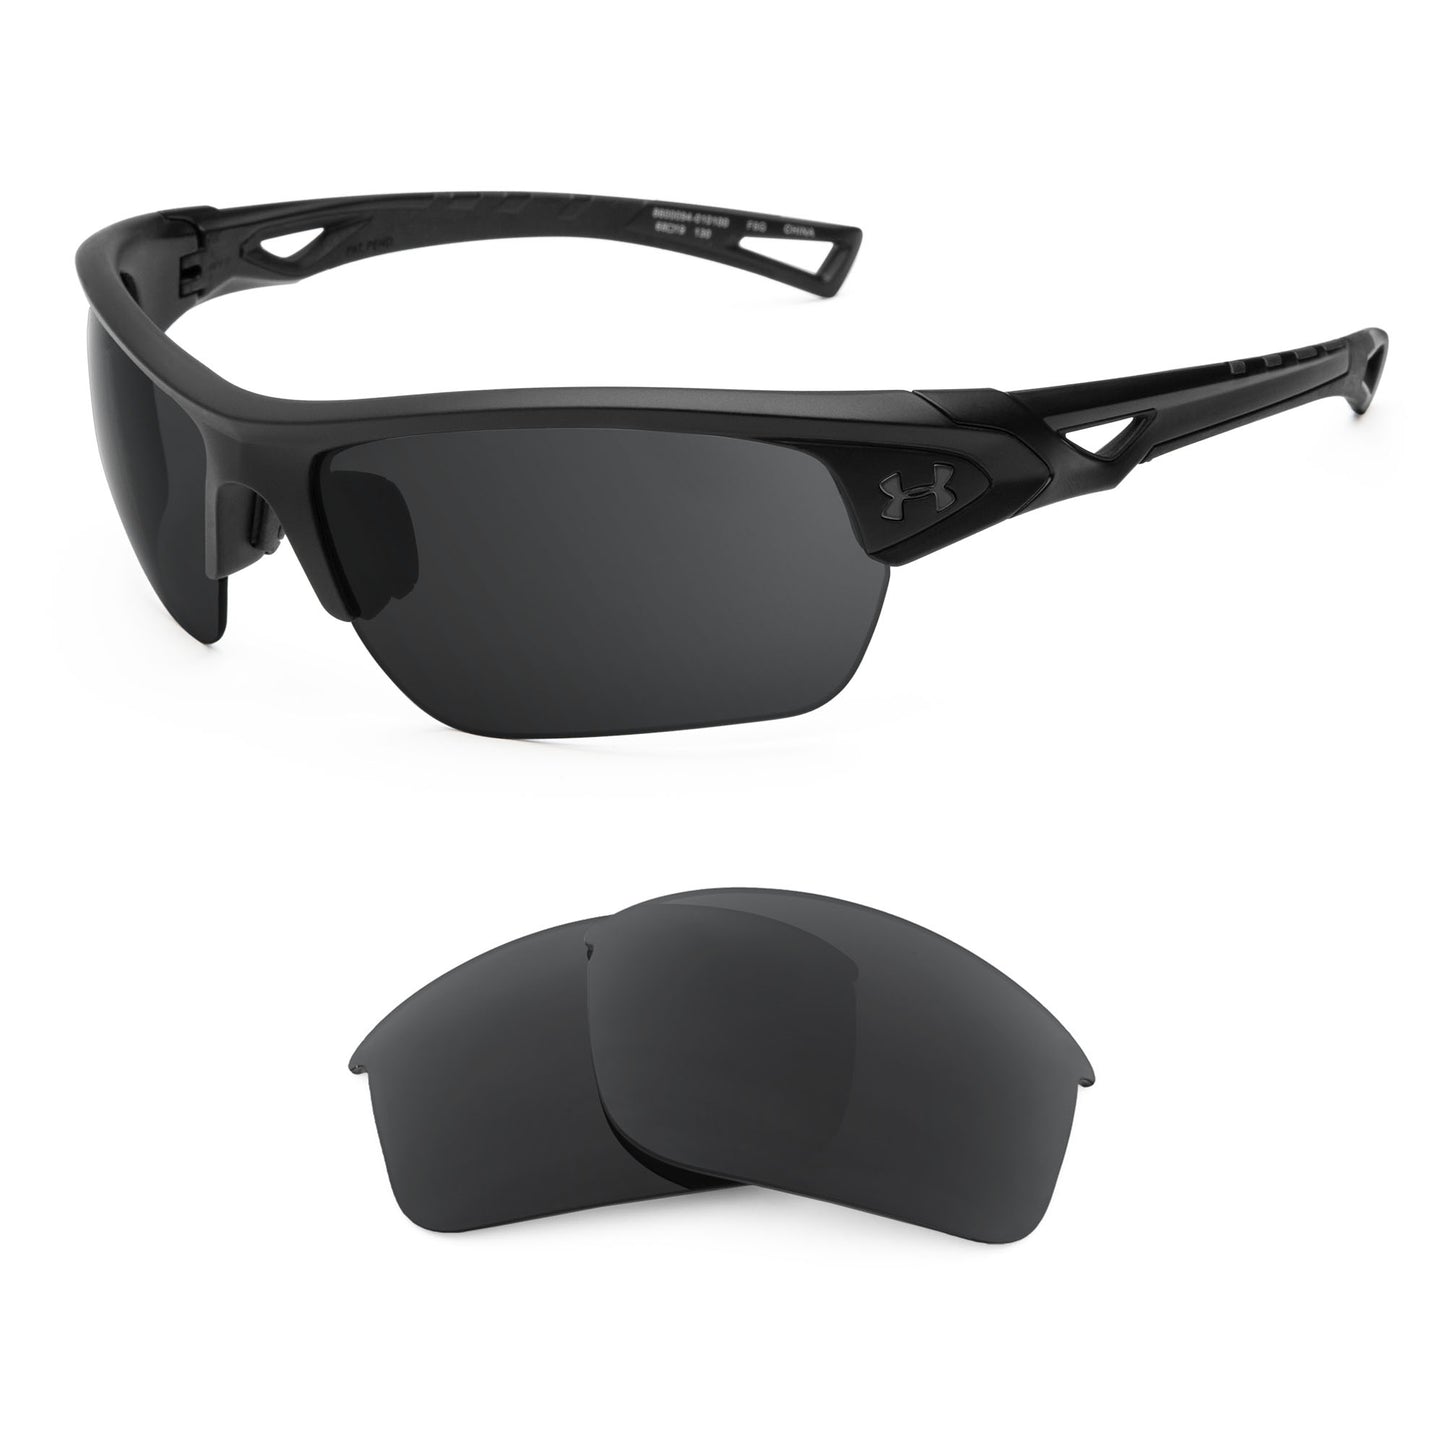 Under Armour Octane sunglasses with replacement lenses